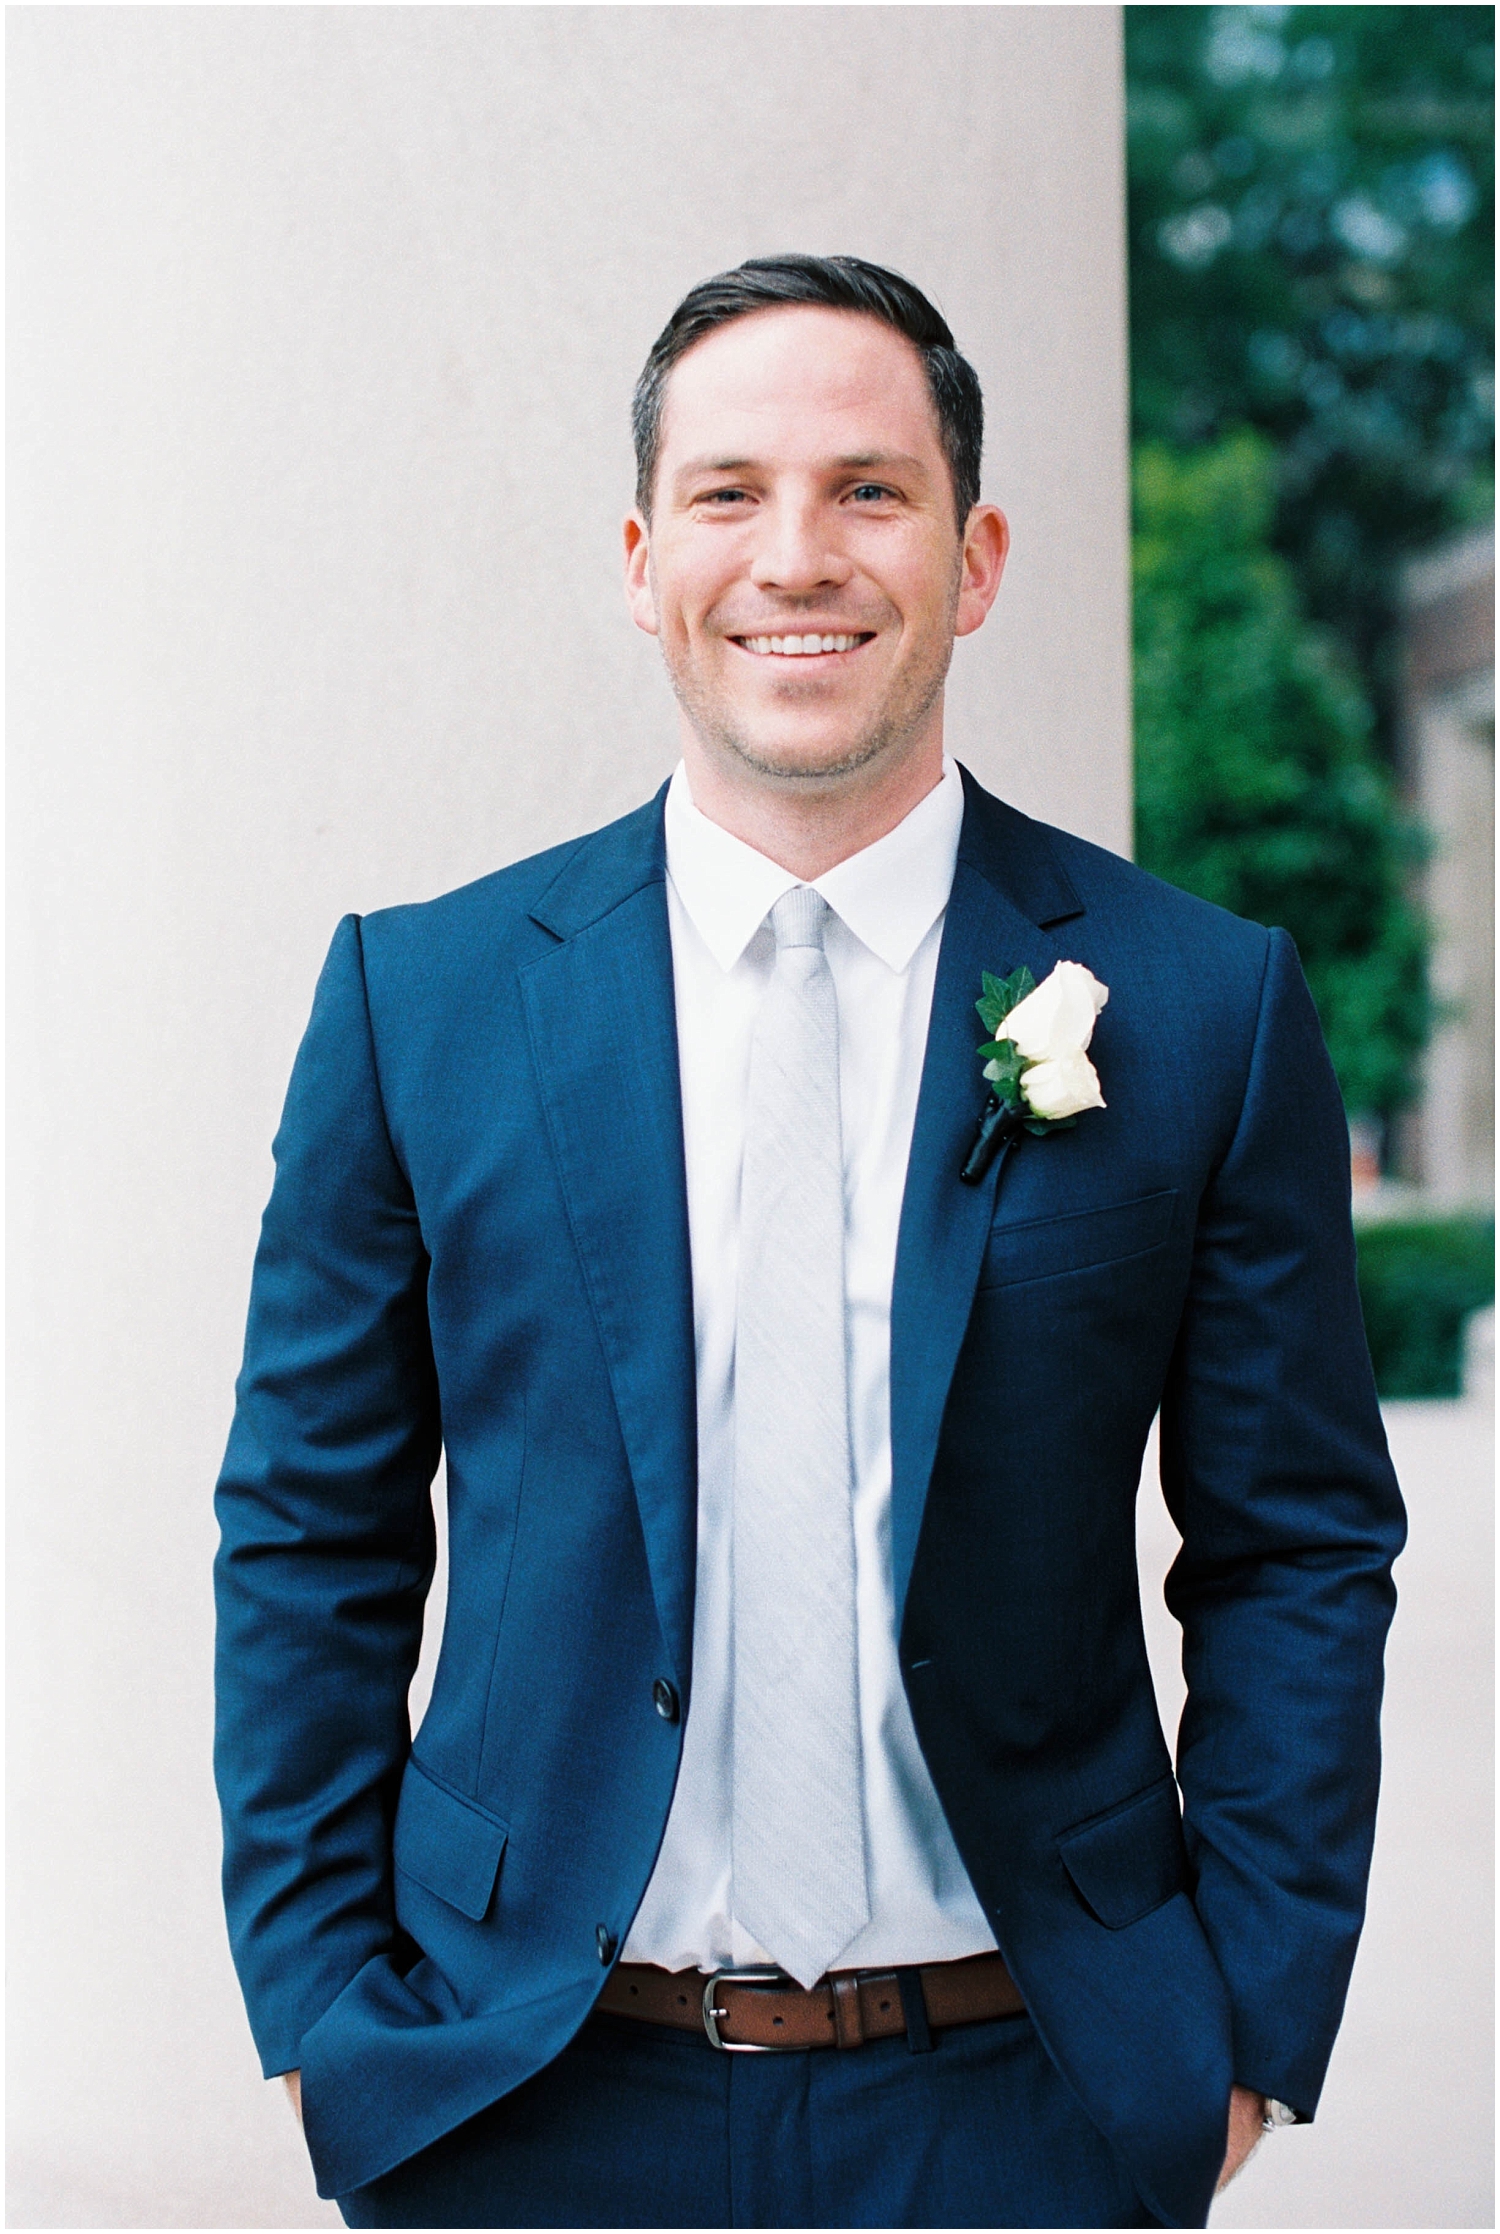  groom wearing a navy suit and boutonniere 